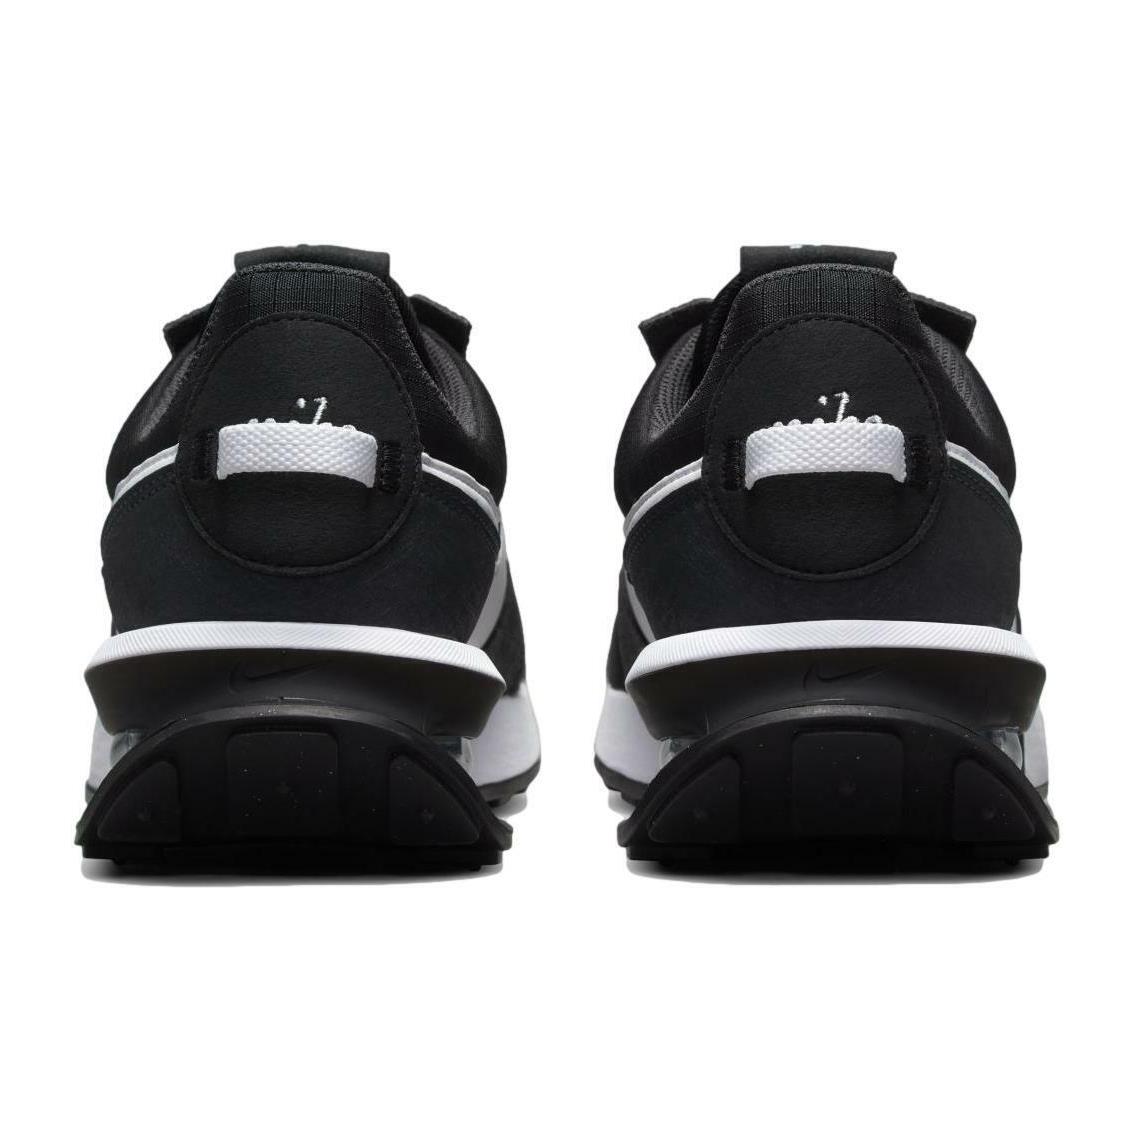 Nike shoes Air - Black/White-Anthracite 4